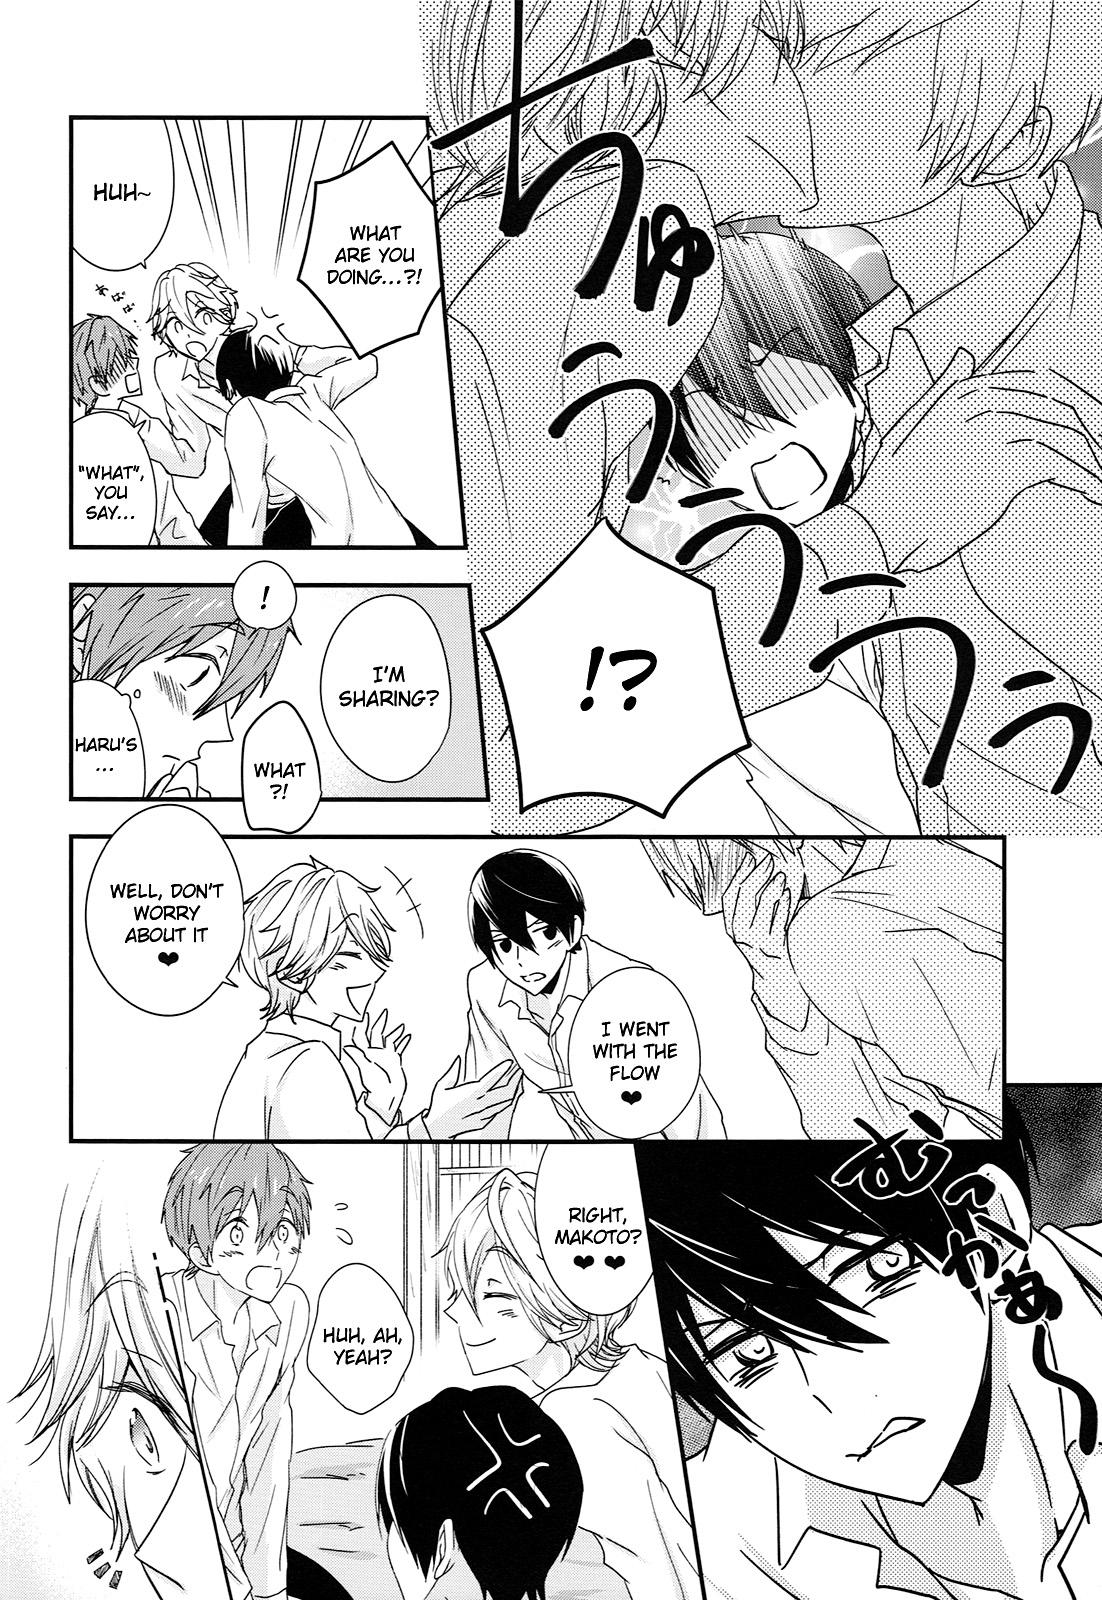 Hardcoresex TRIANGLE FUNCTION ver. DT - Free Asslicking - Page 11